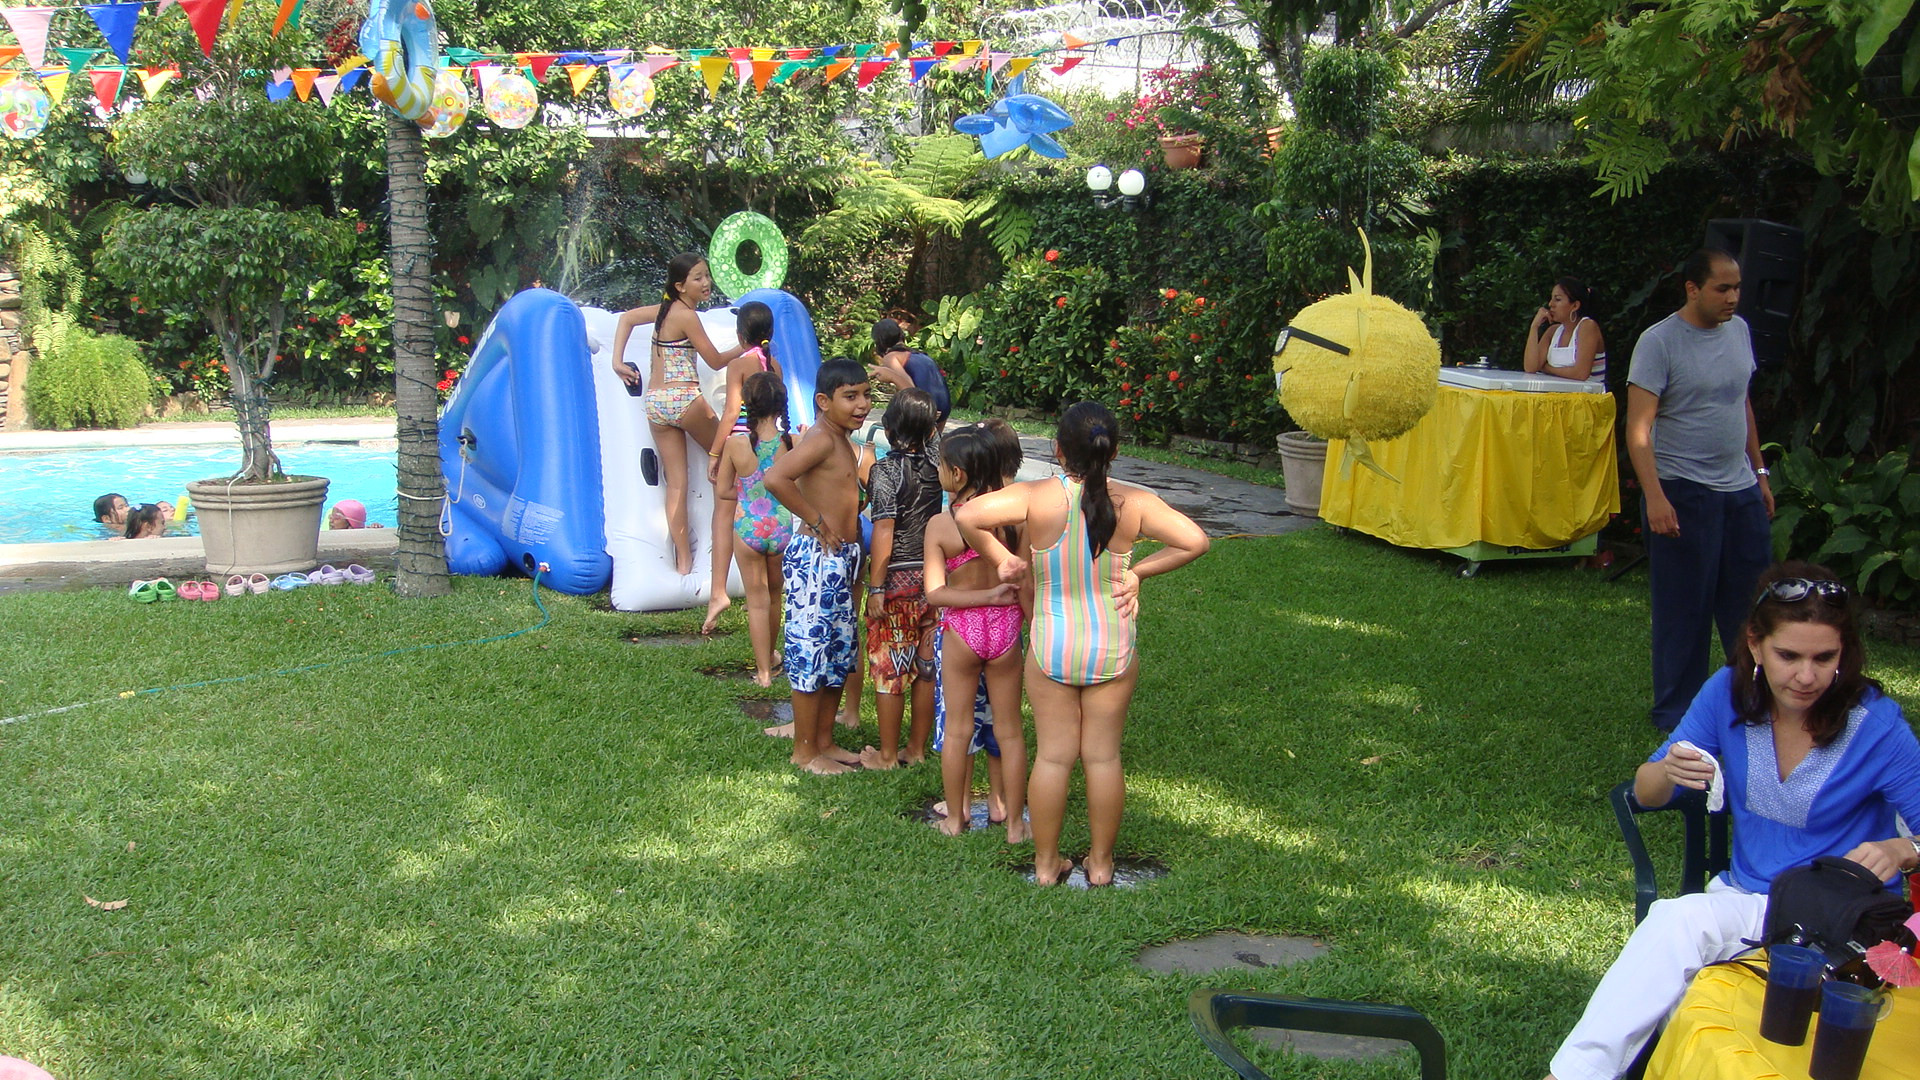 Pool Party Ideas For Girls
 Ideas for a Cool Sunny Pool Party